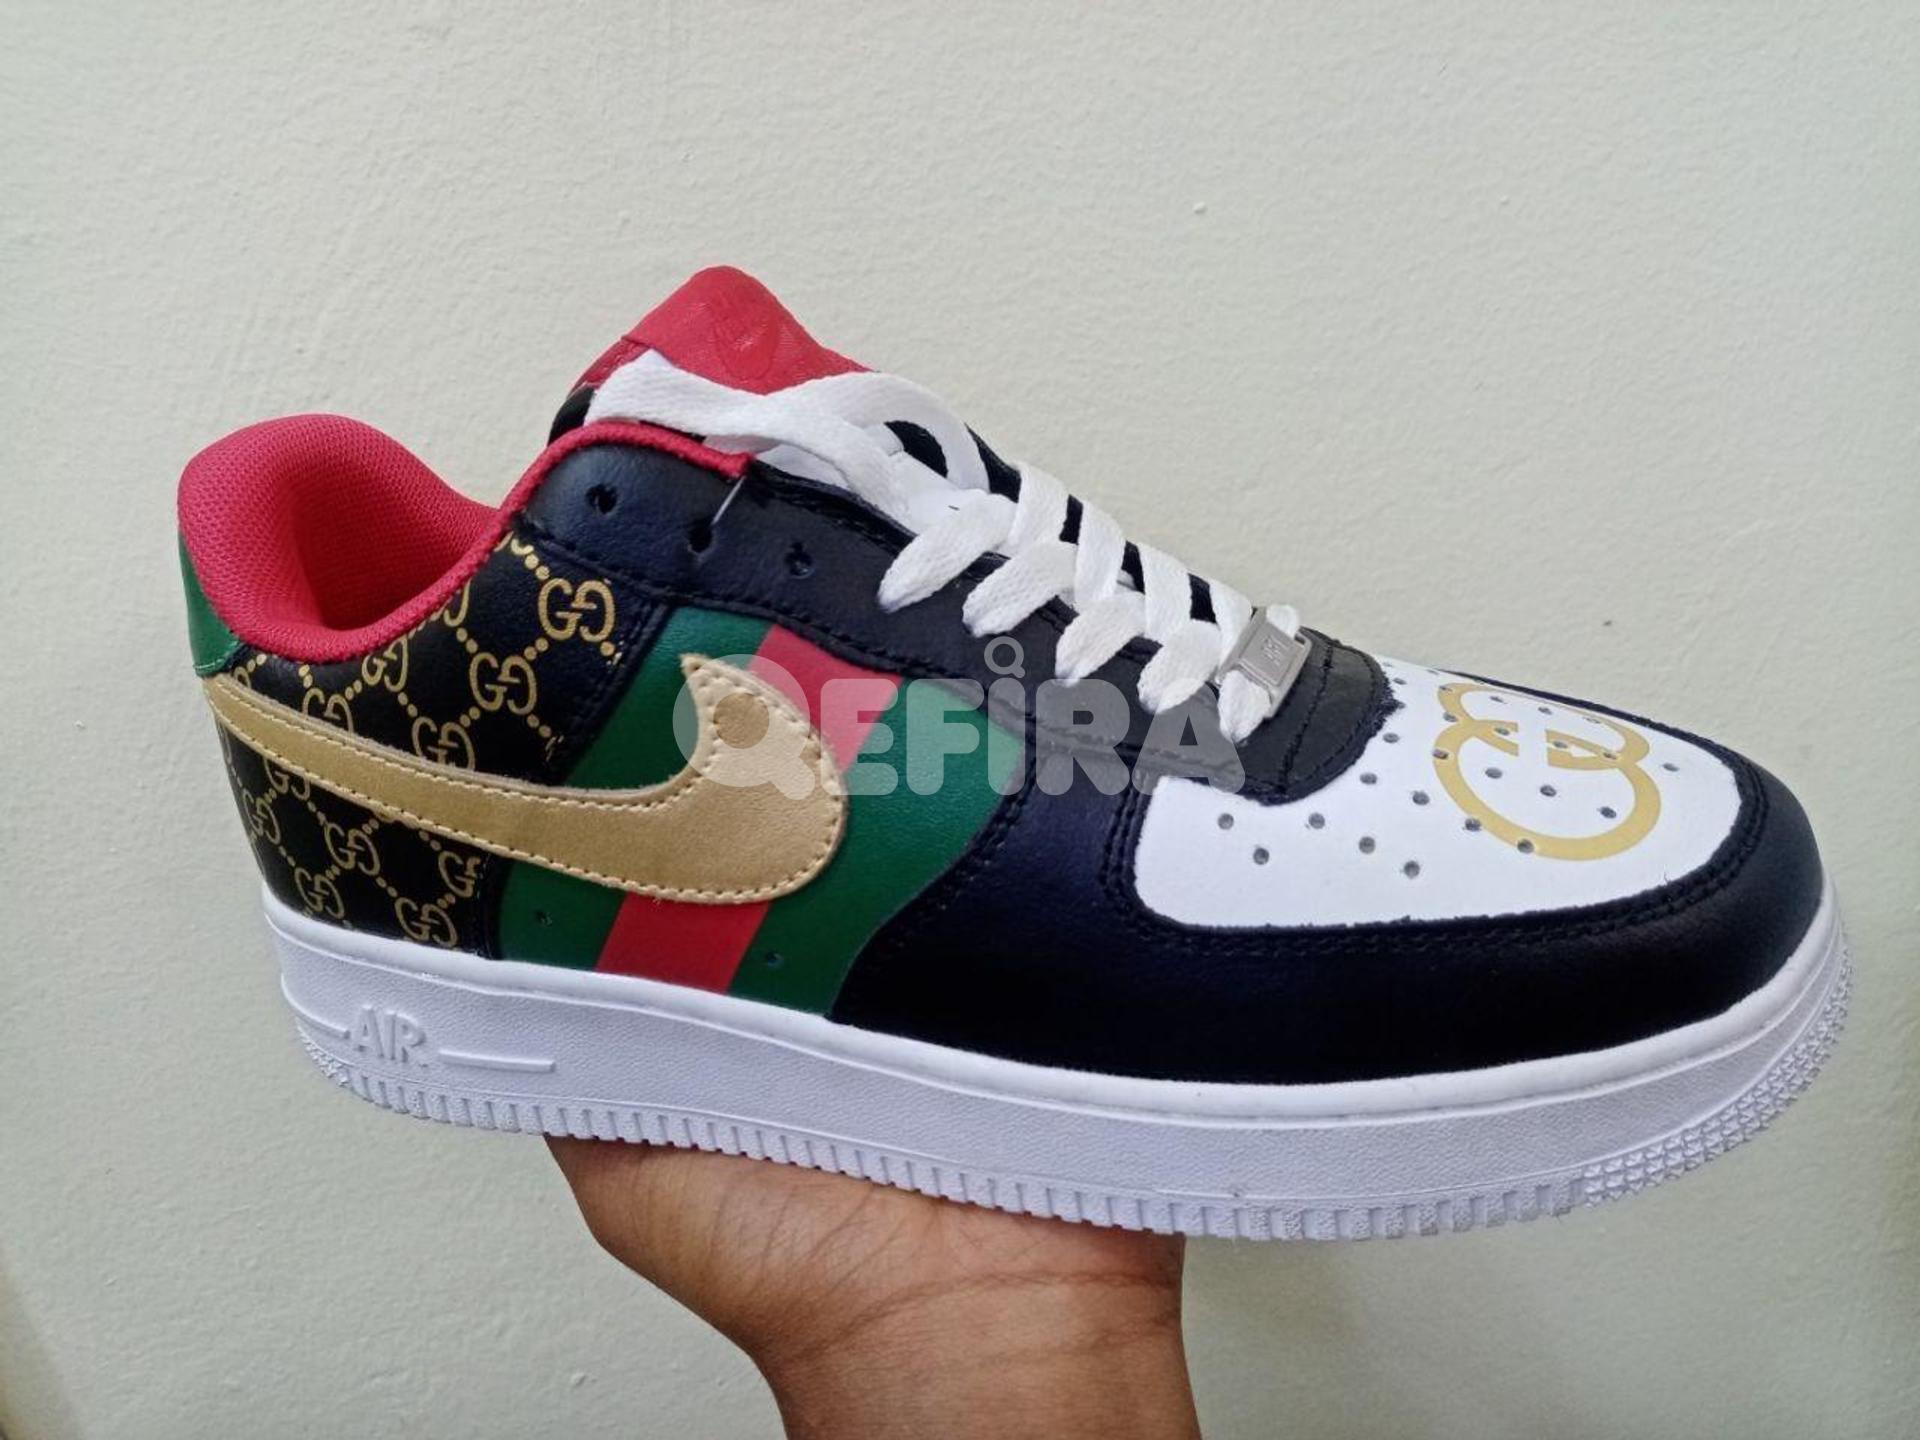 Gucci Nike Men Shoes in Addis Ababa 